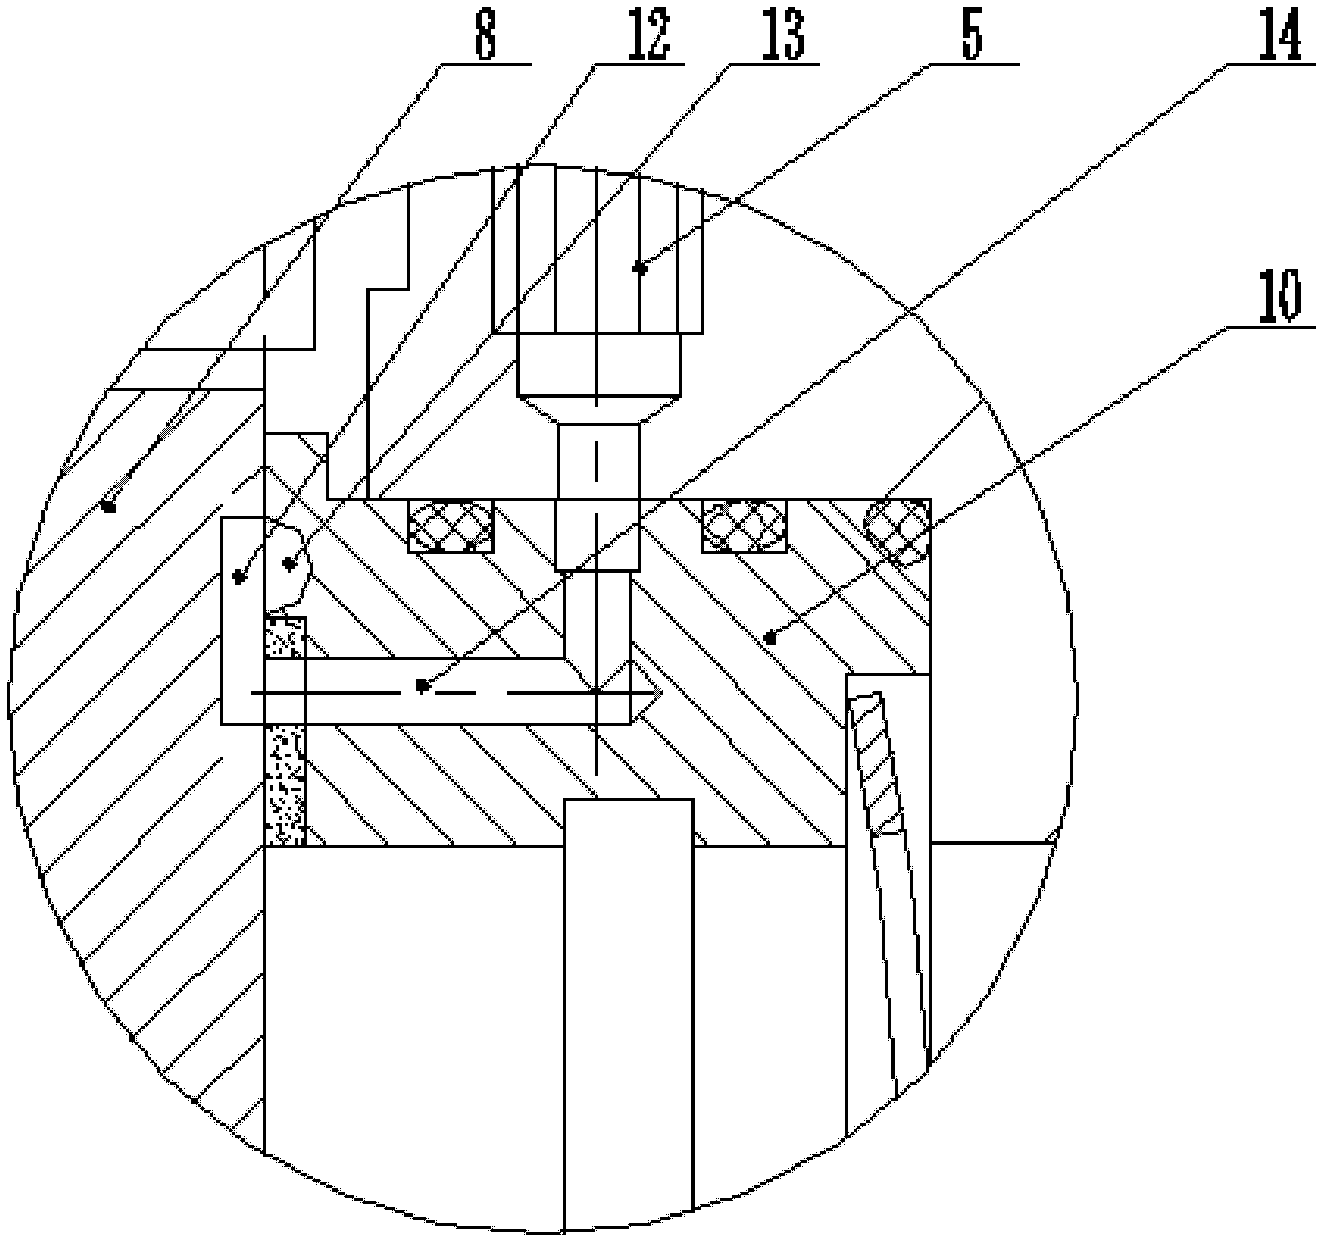 Flat gate valve with seal grease being automatically injected